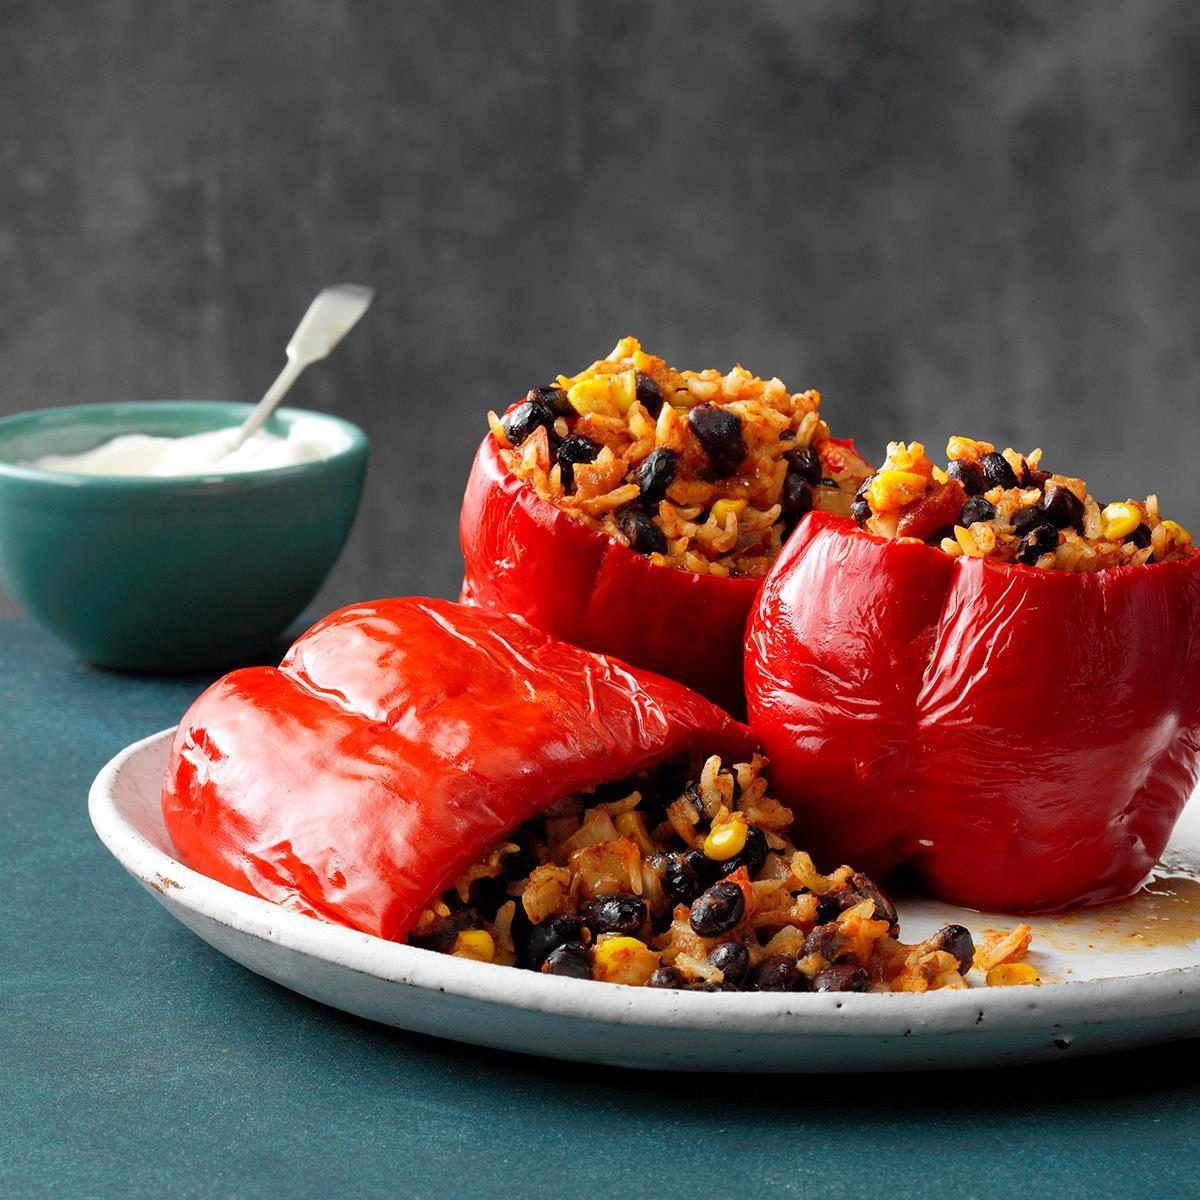 slow-cooked-stuffed-peppers-recipe-taste-of-home